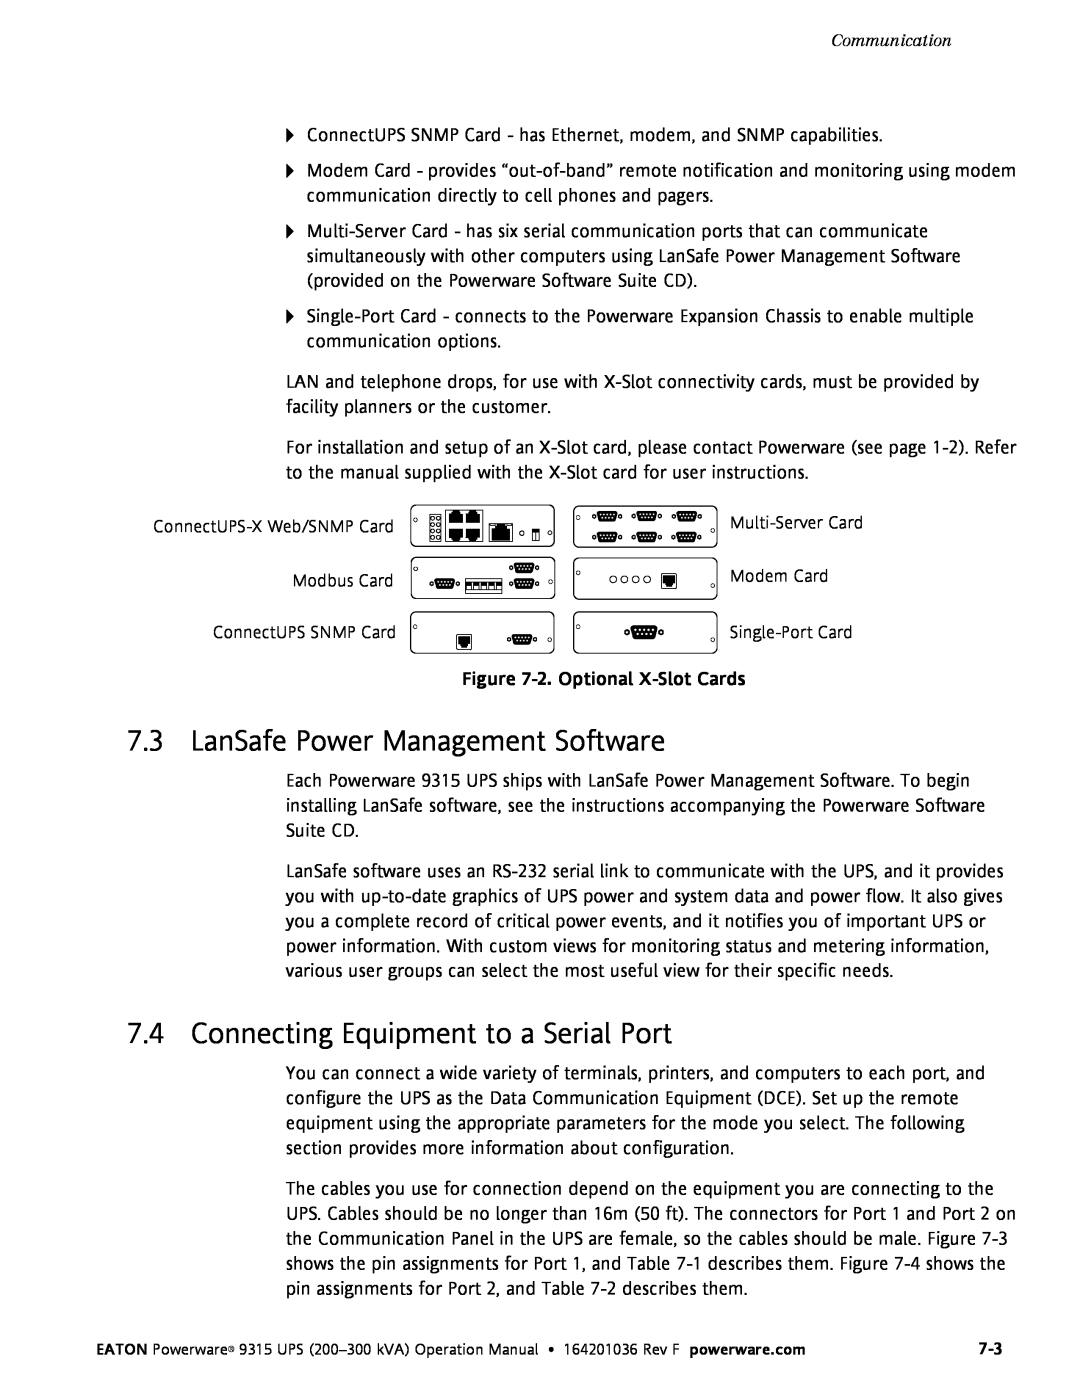 Eaton Electrical Powerware 9315 operation manual LanSafe Power Management Software, Connecting Equipment to a Serial Port 